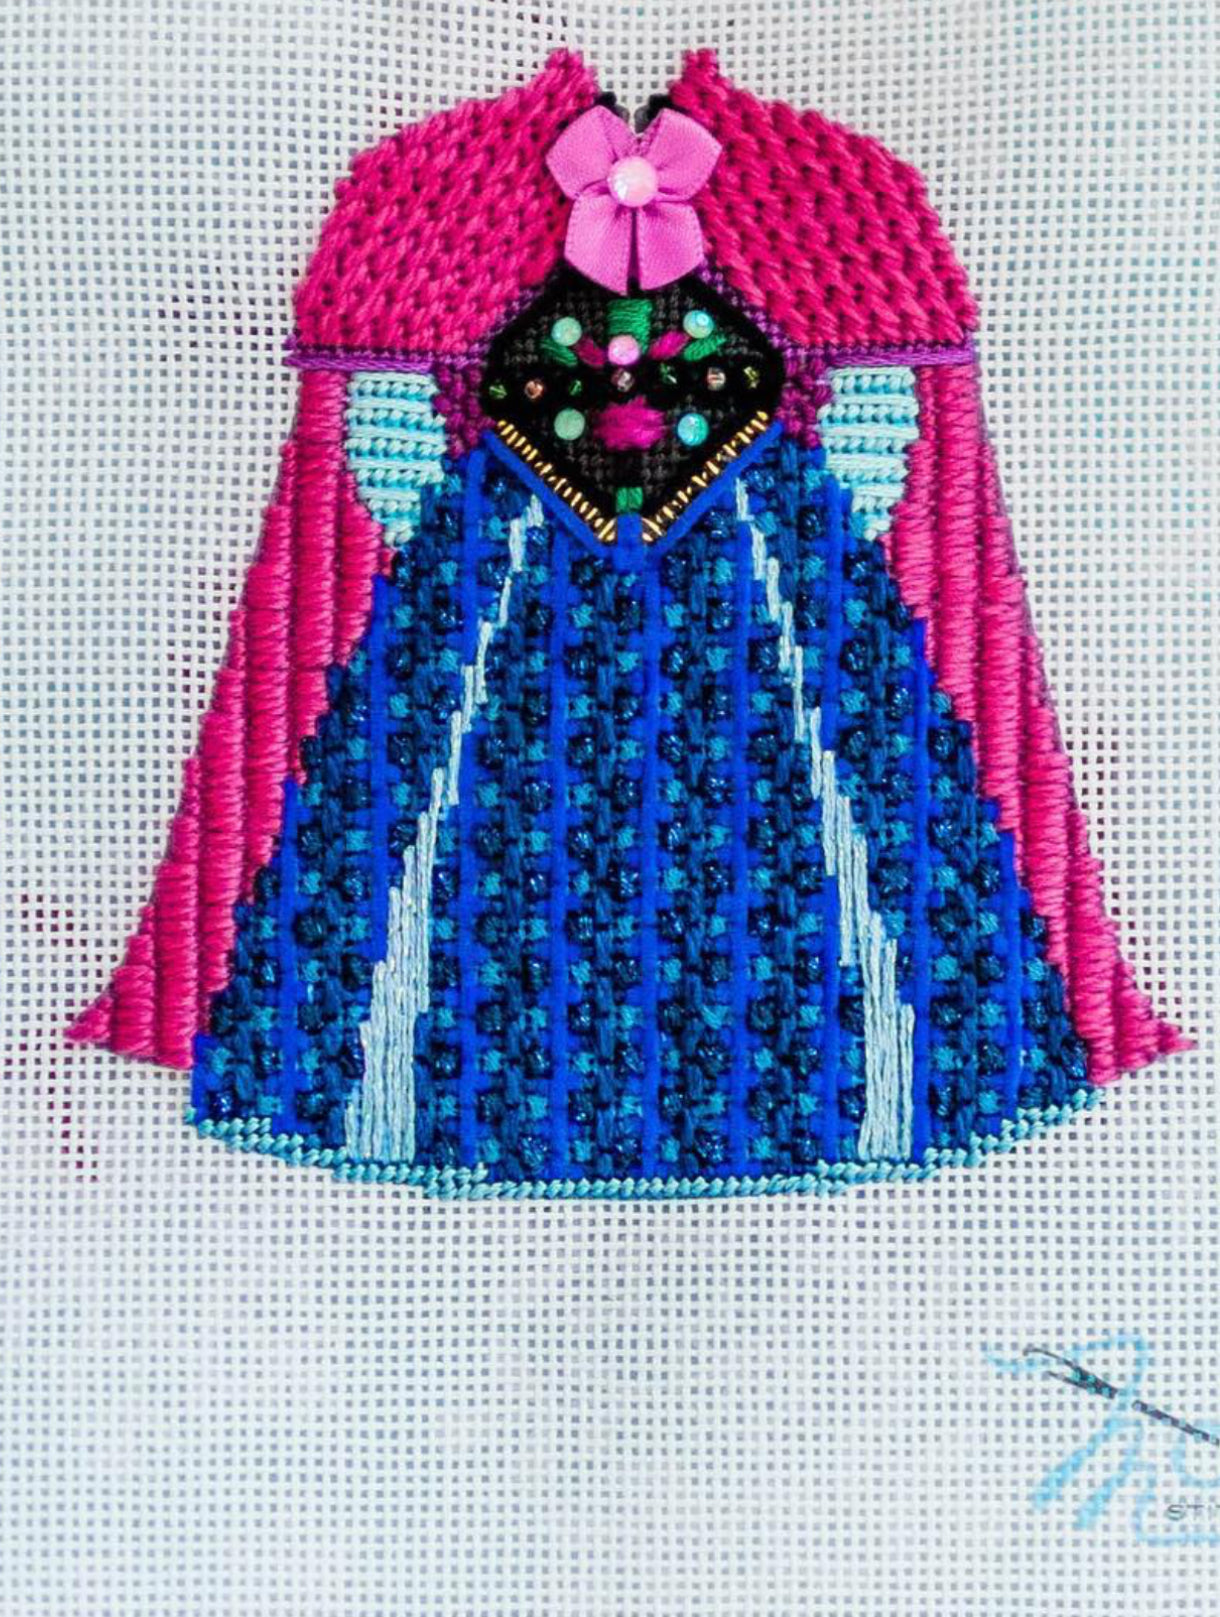 Moore Stitching Princess Gowns - Norwegian Princess